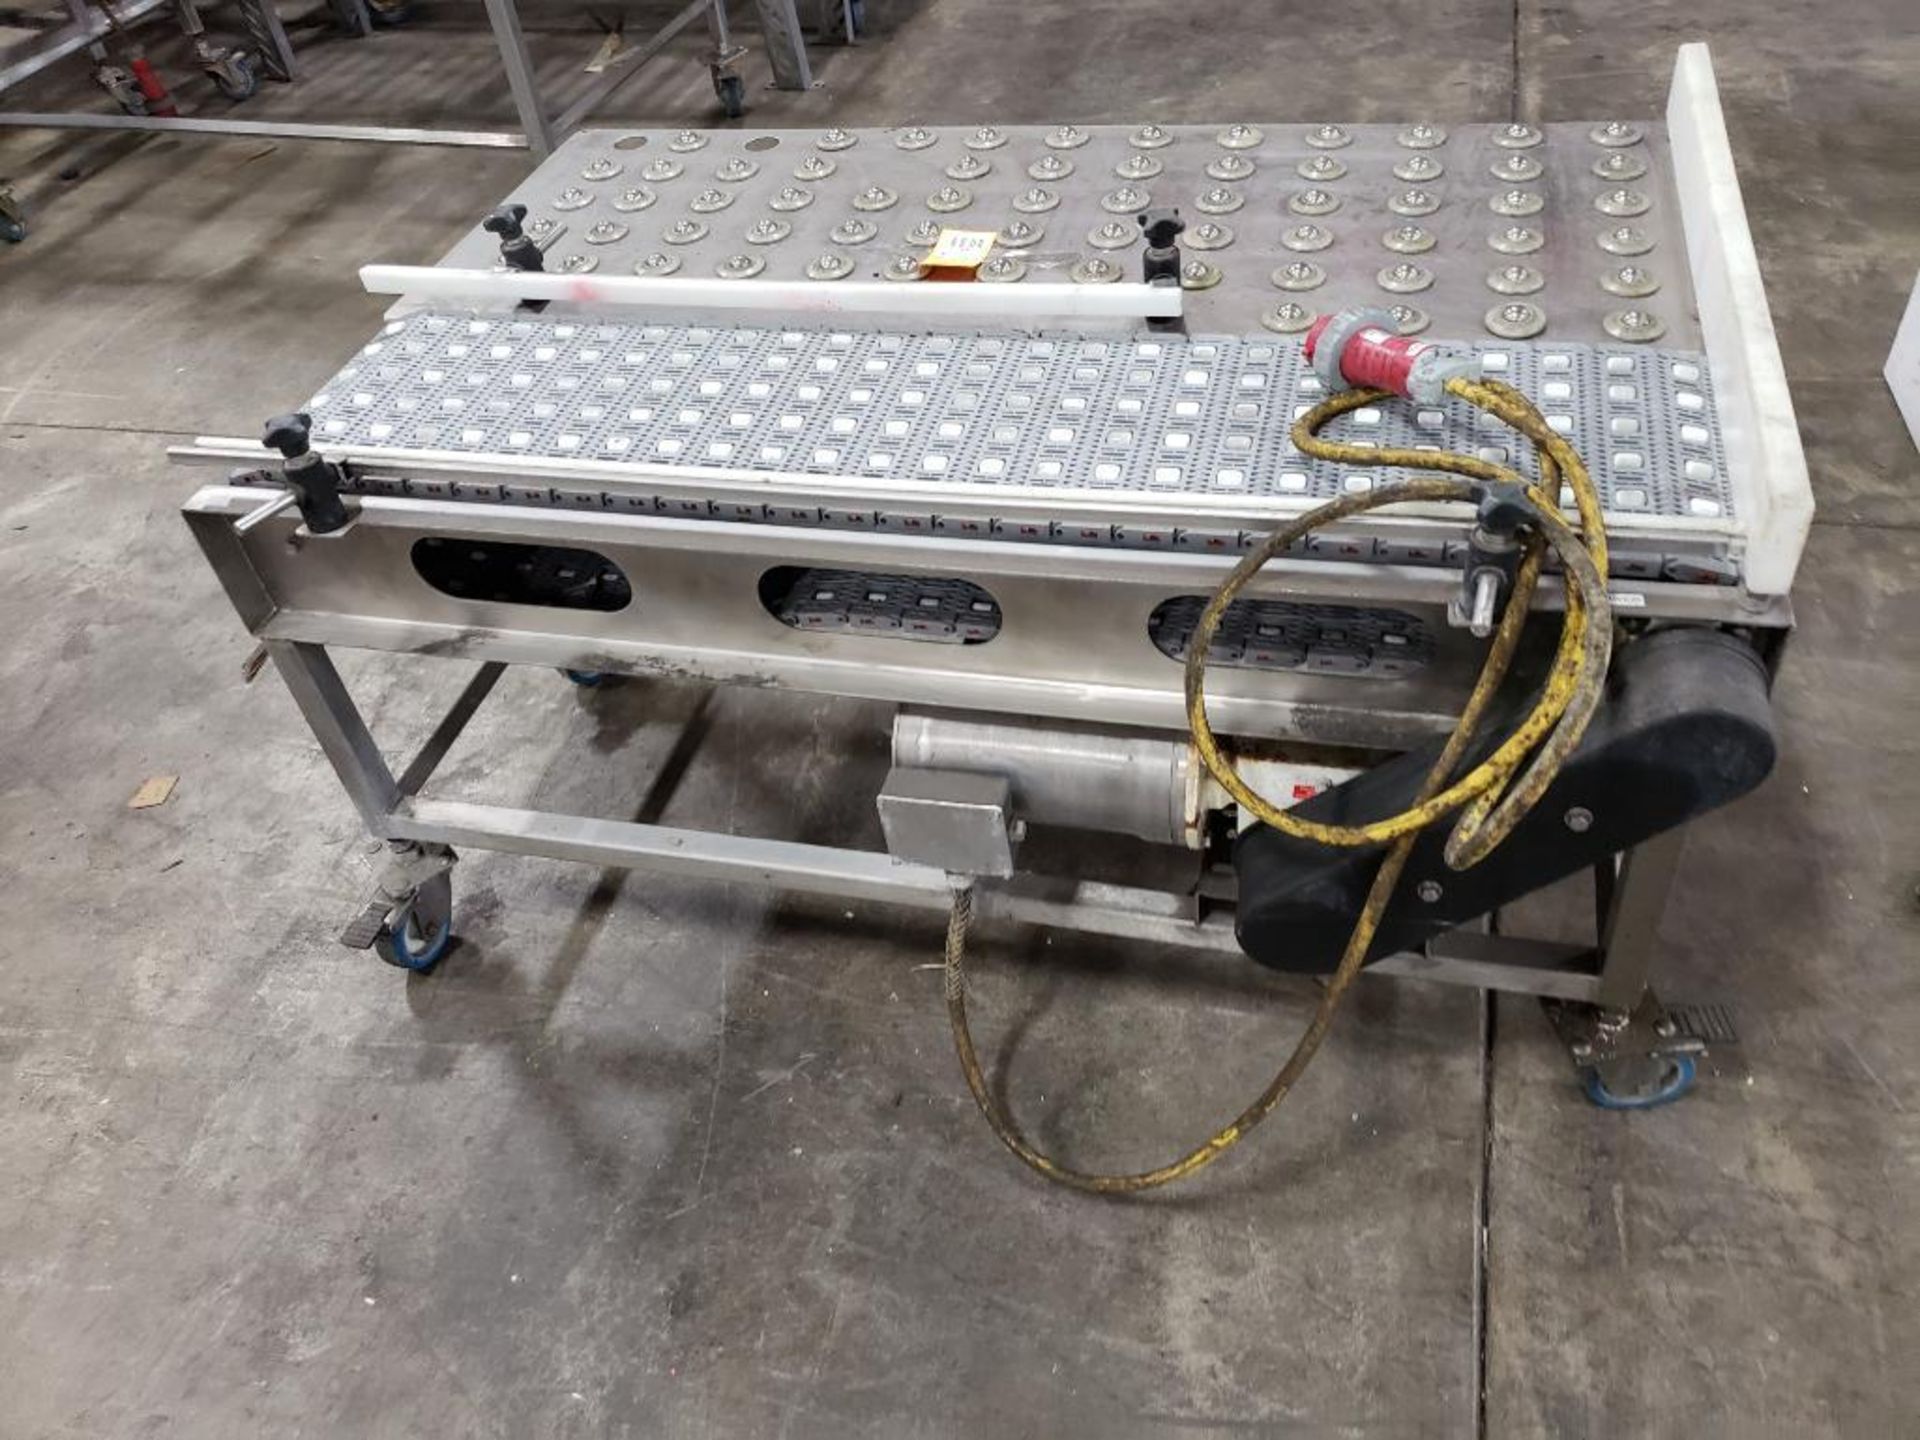 Food grade washdown power conveyor on casters with roller side table. Overall size 53" long x 32" w - Image 5 of 7